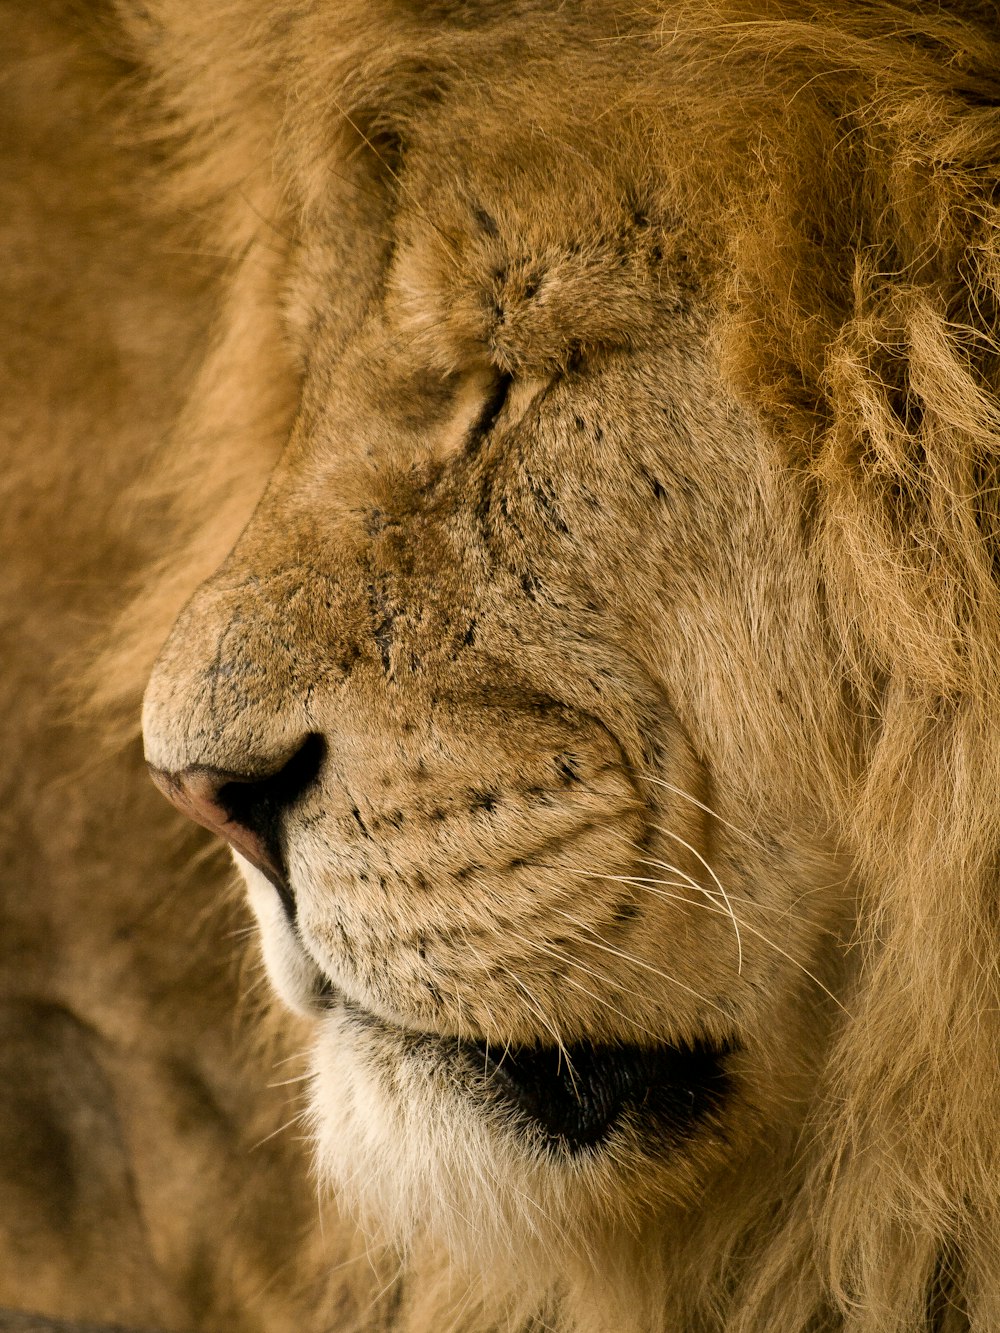 a close up of a lion's face with it's eyes closed